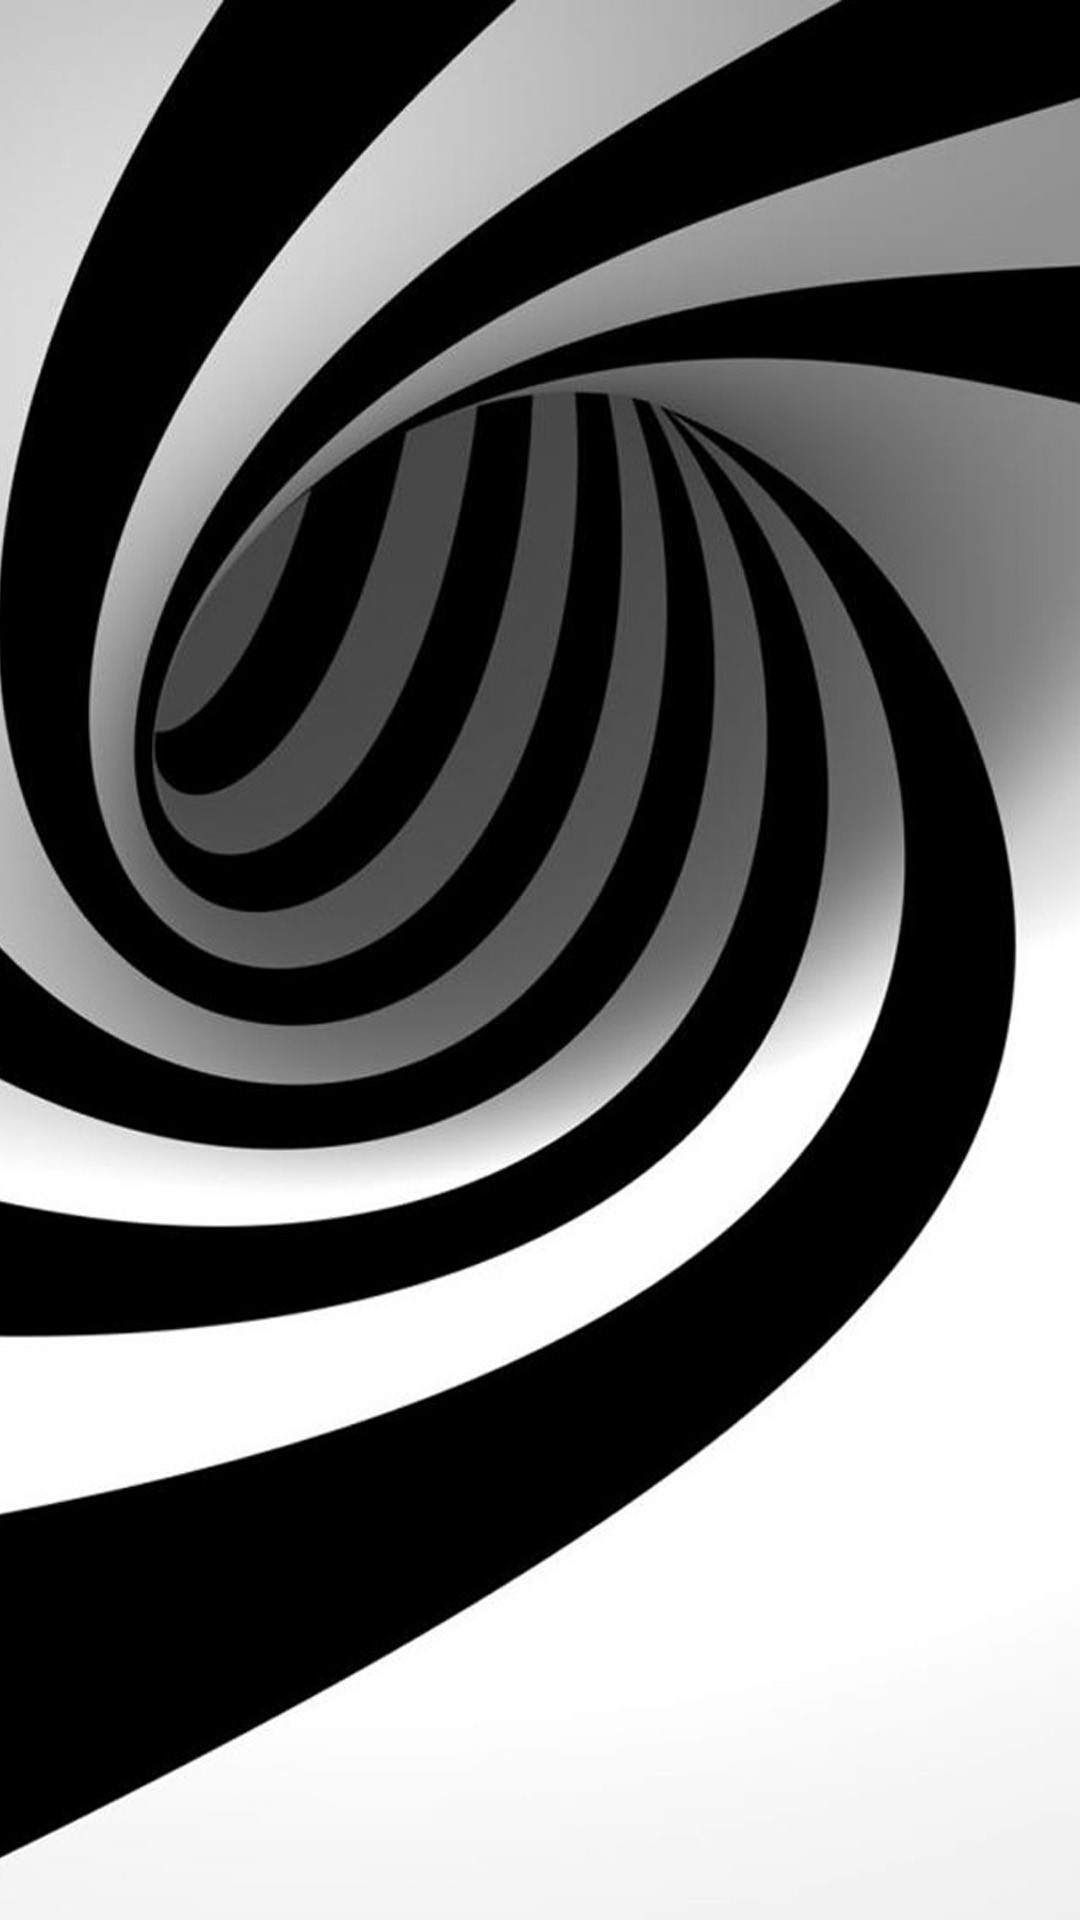 Black and White Swirl Wallpaper (32+ images)